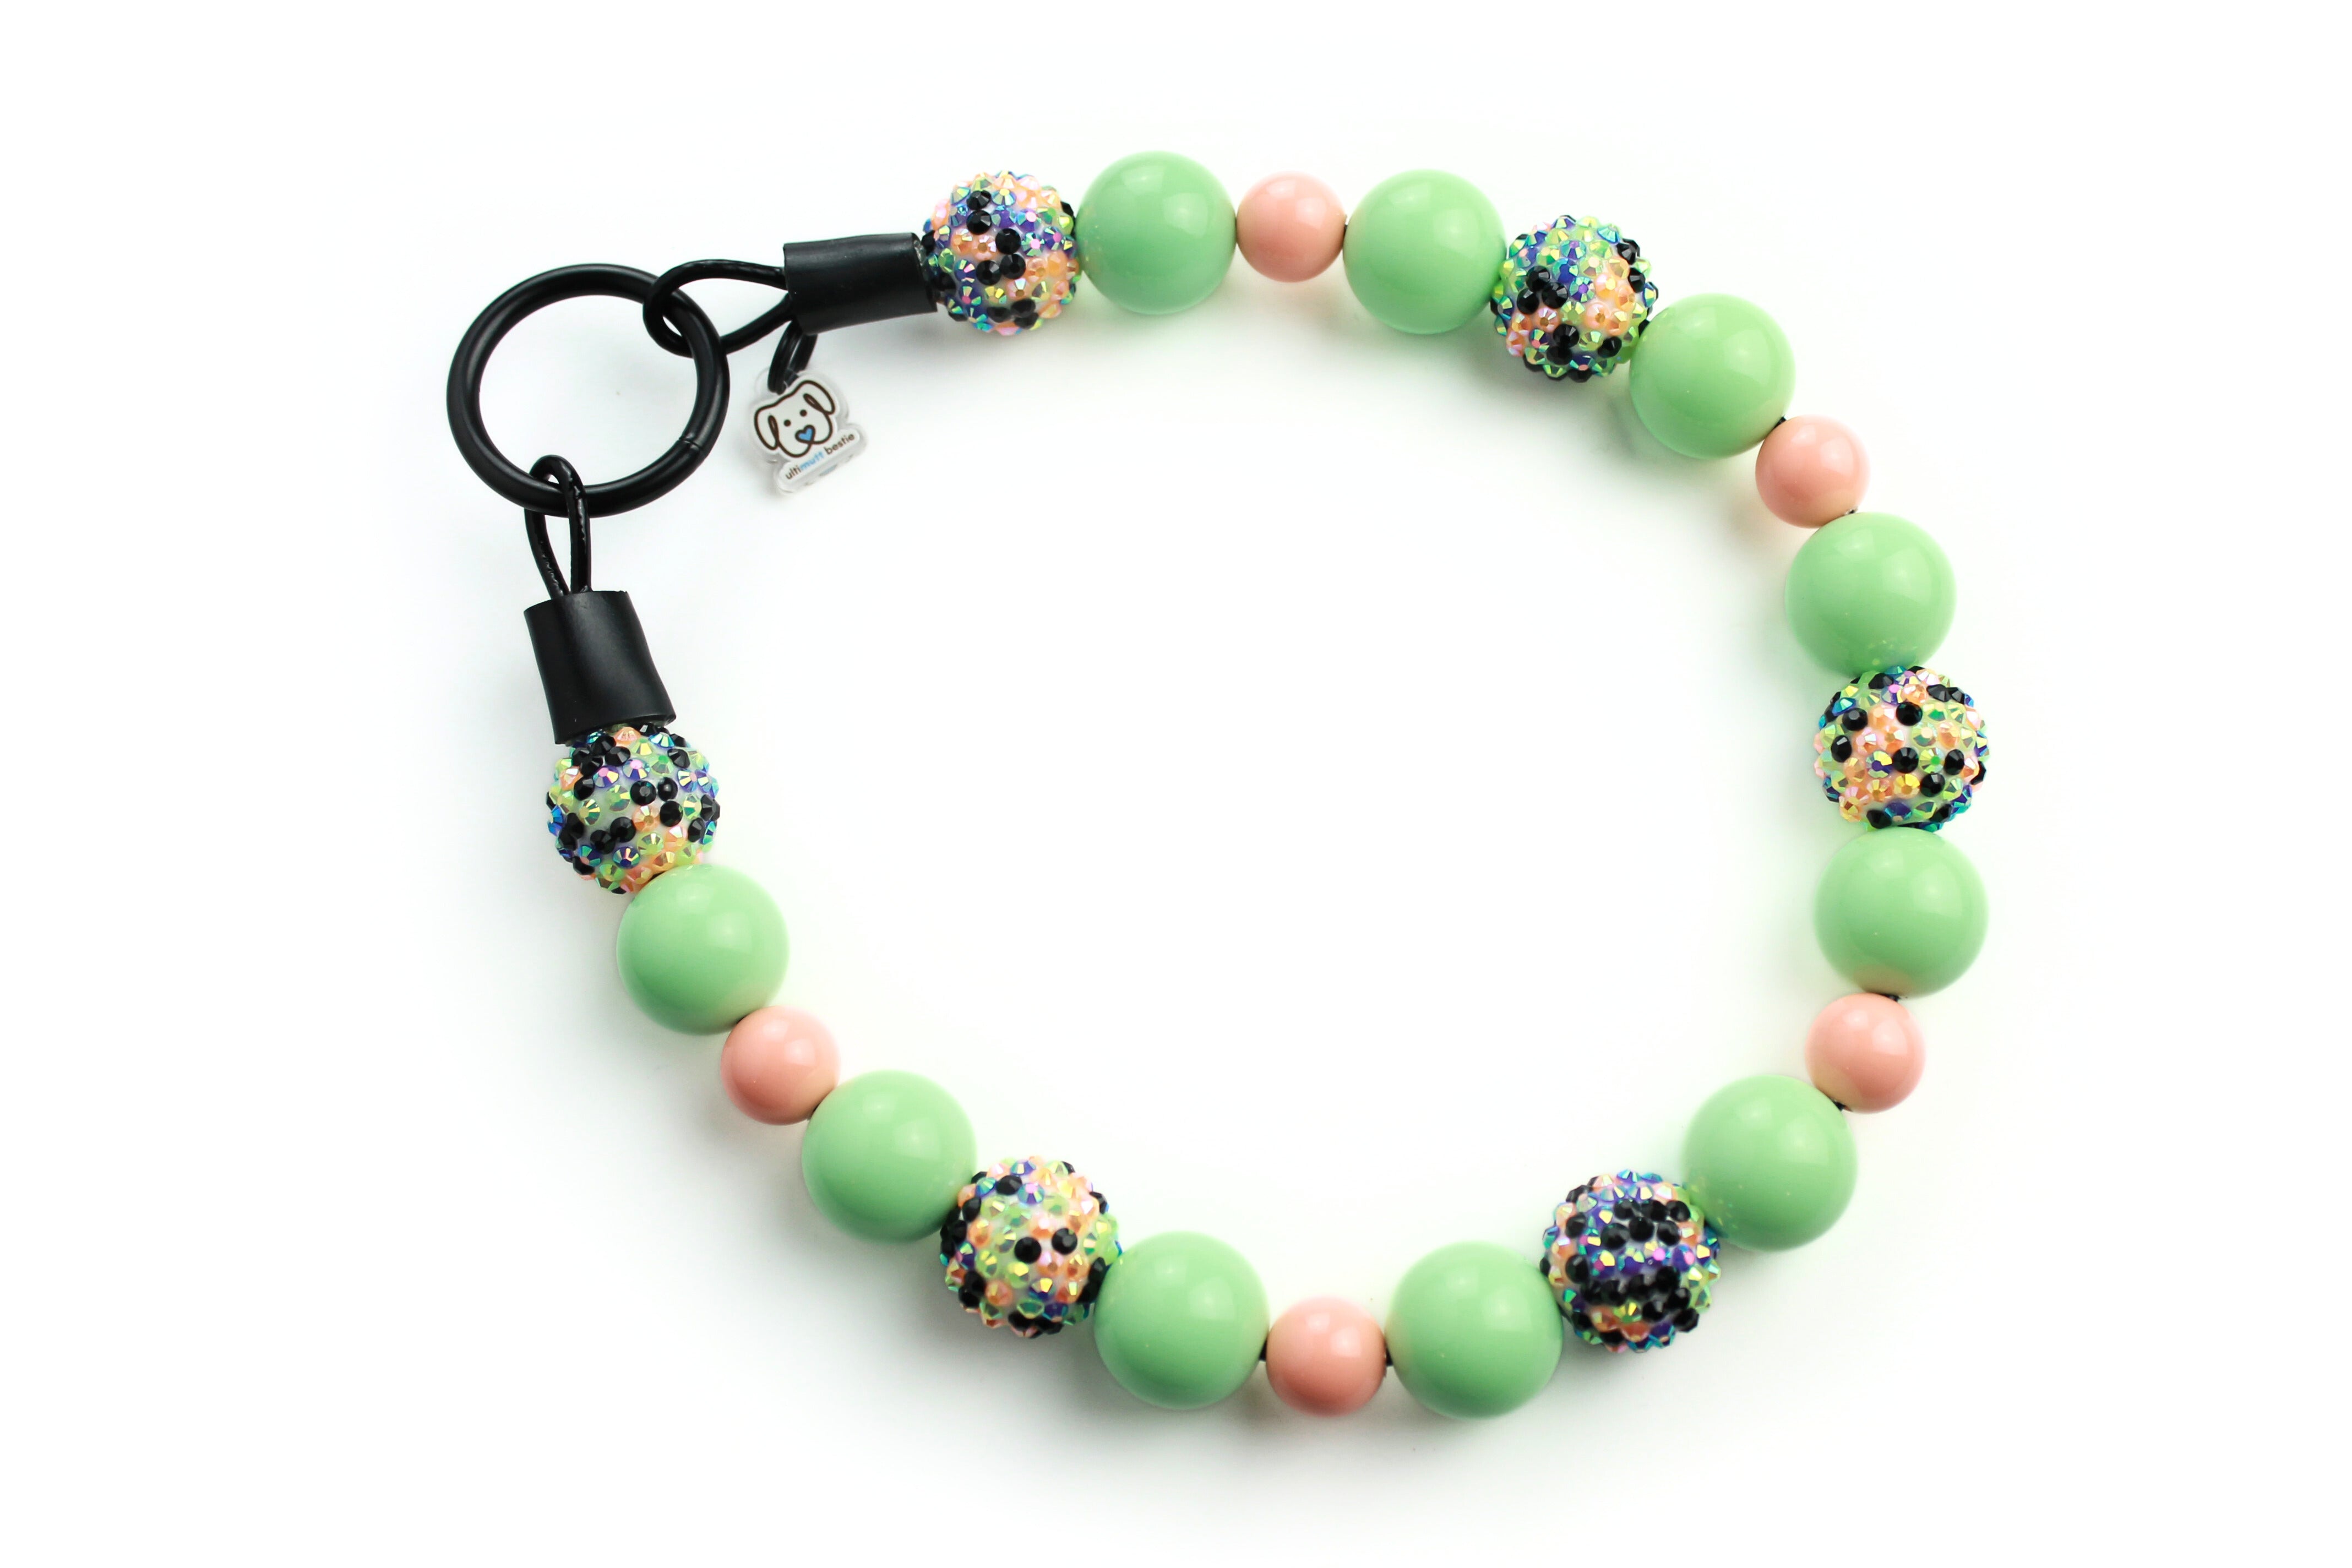 large bead dog collar pastel green, multi - color rhinestone and small peach accent beads